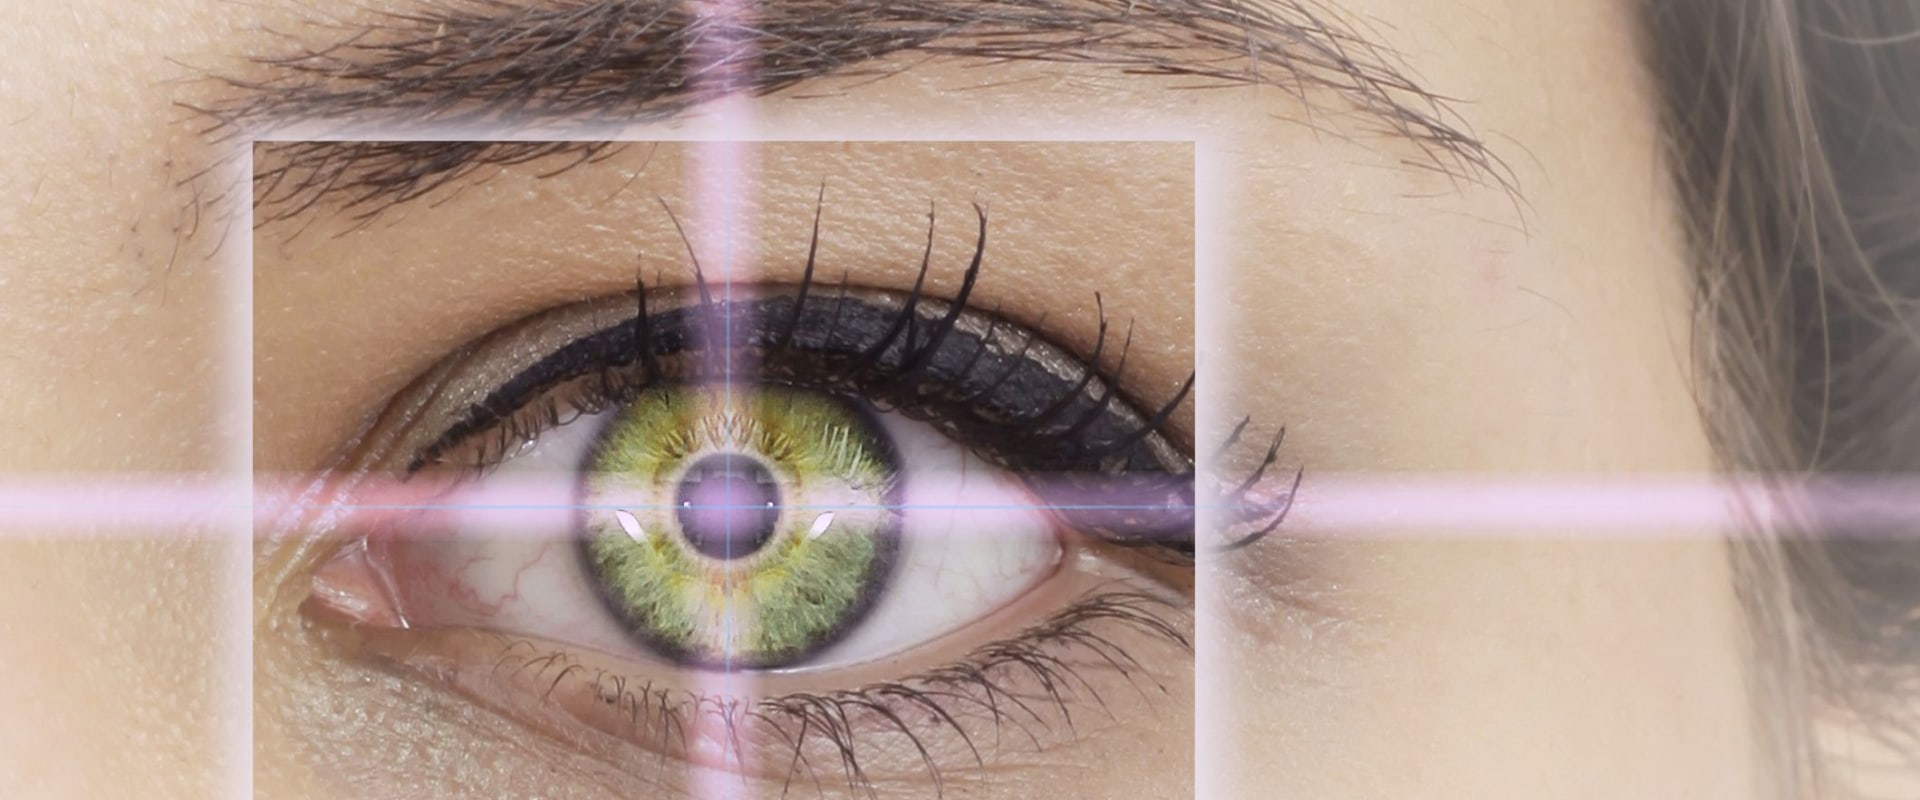 How Long Does it Take to See Results from LASIK Eye Surgery?